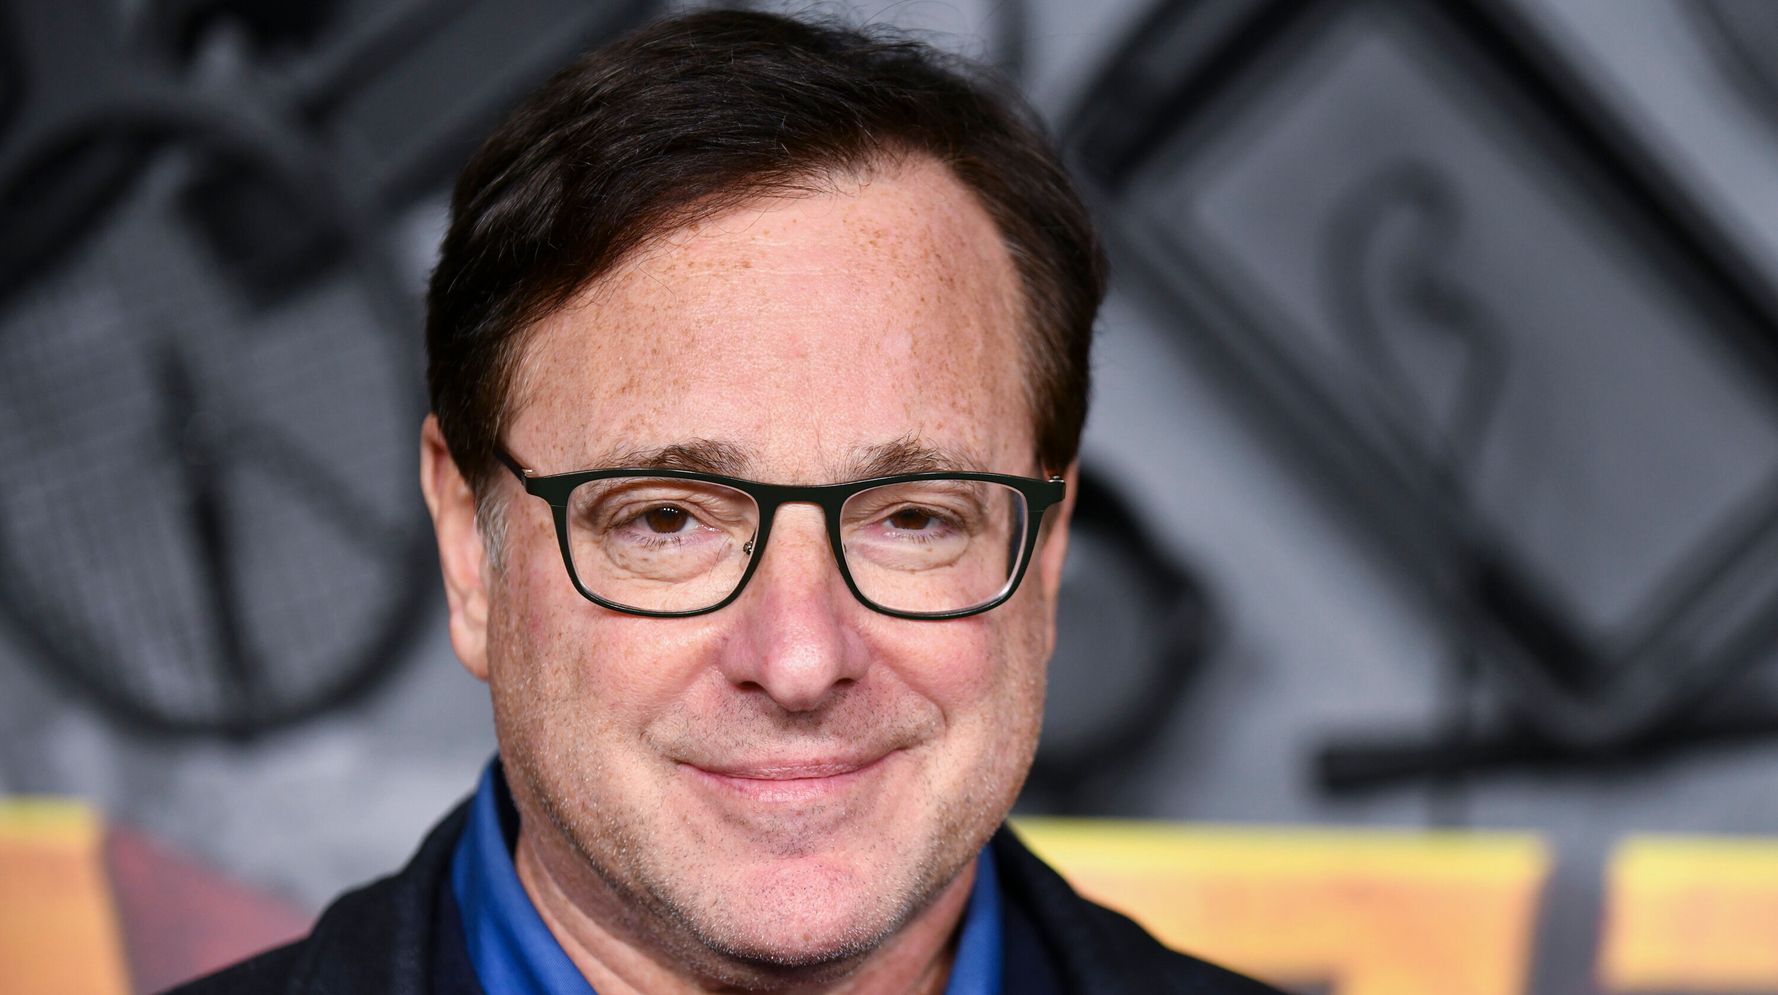 Bob Saget Shared Haunting Thoughts On Mortality Months Before Untimely Death